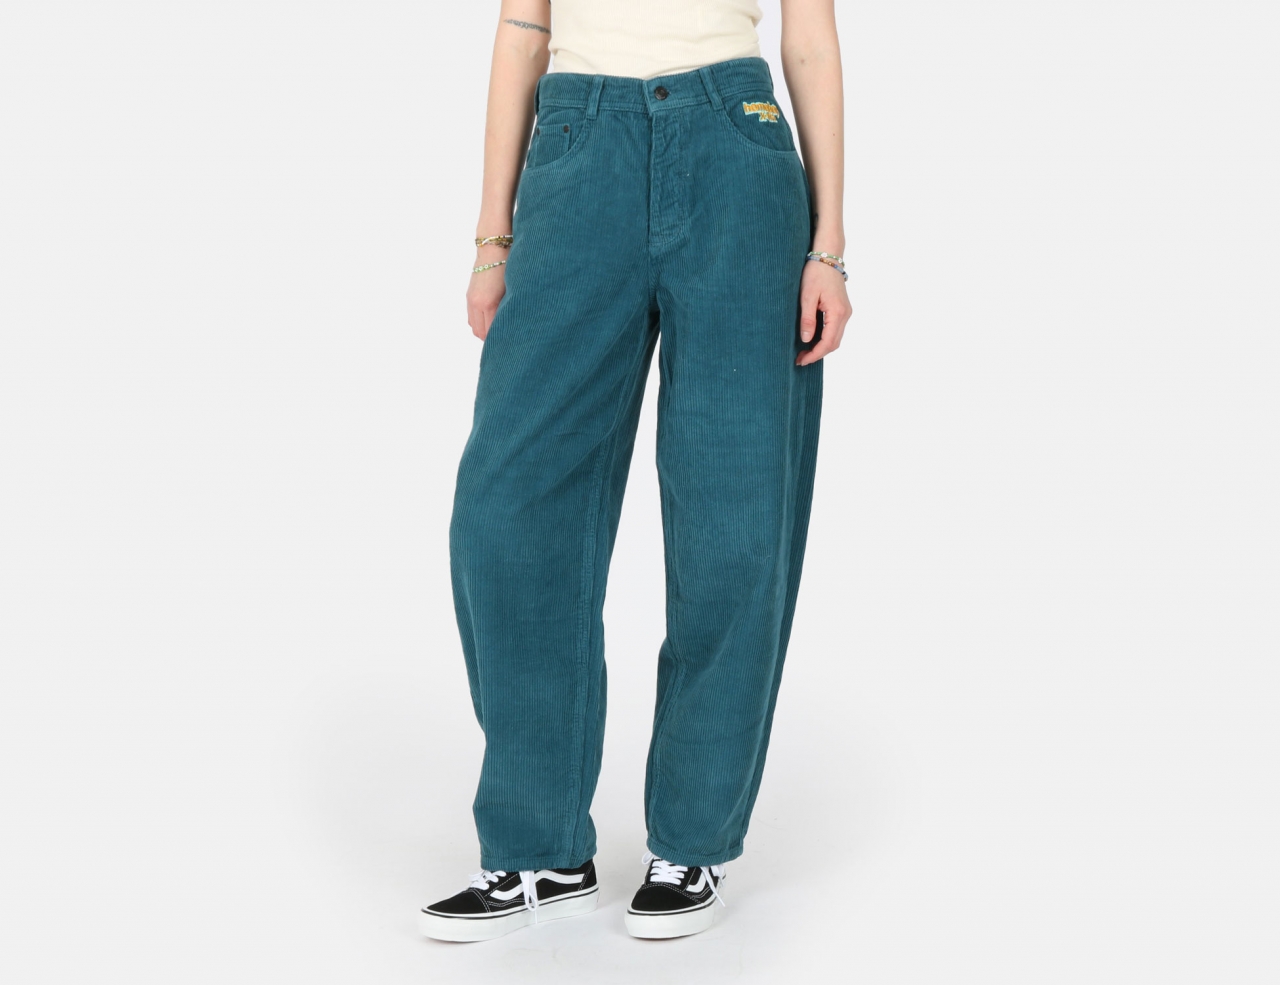 Homeboy x-tra Monster Cord Pant - Petrol